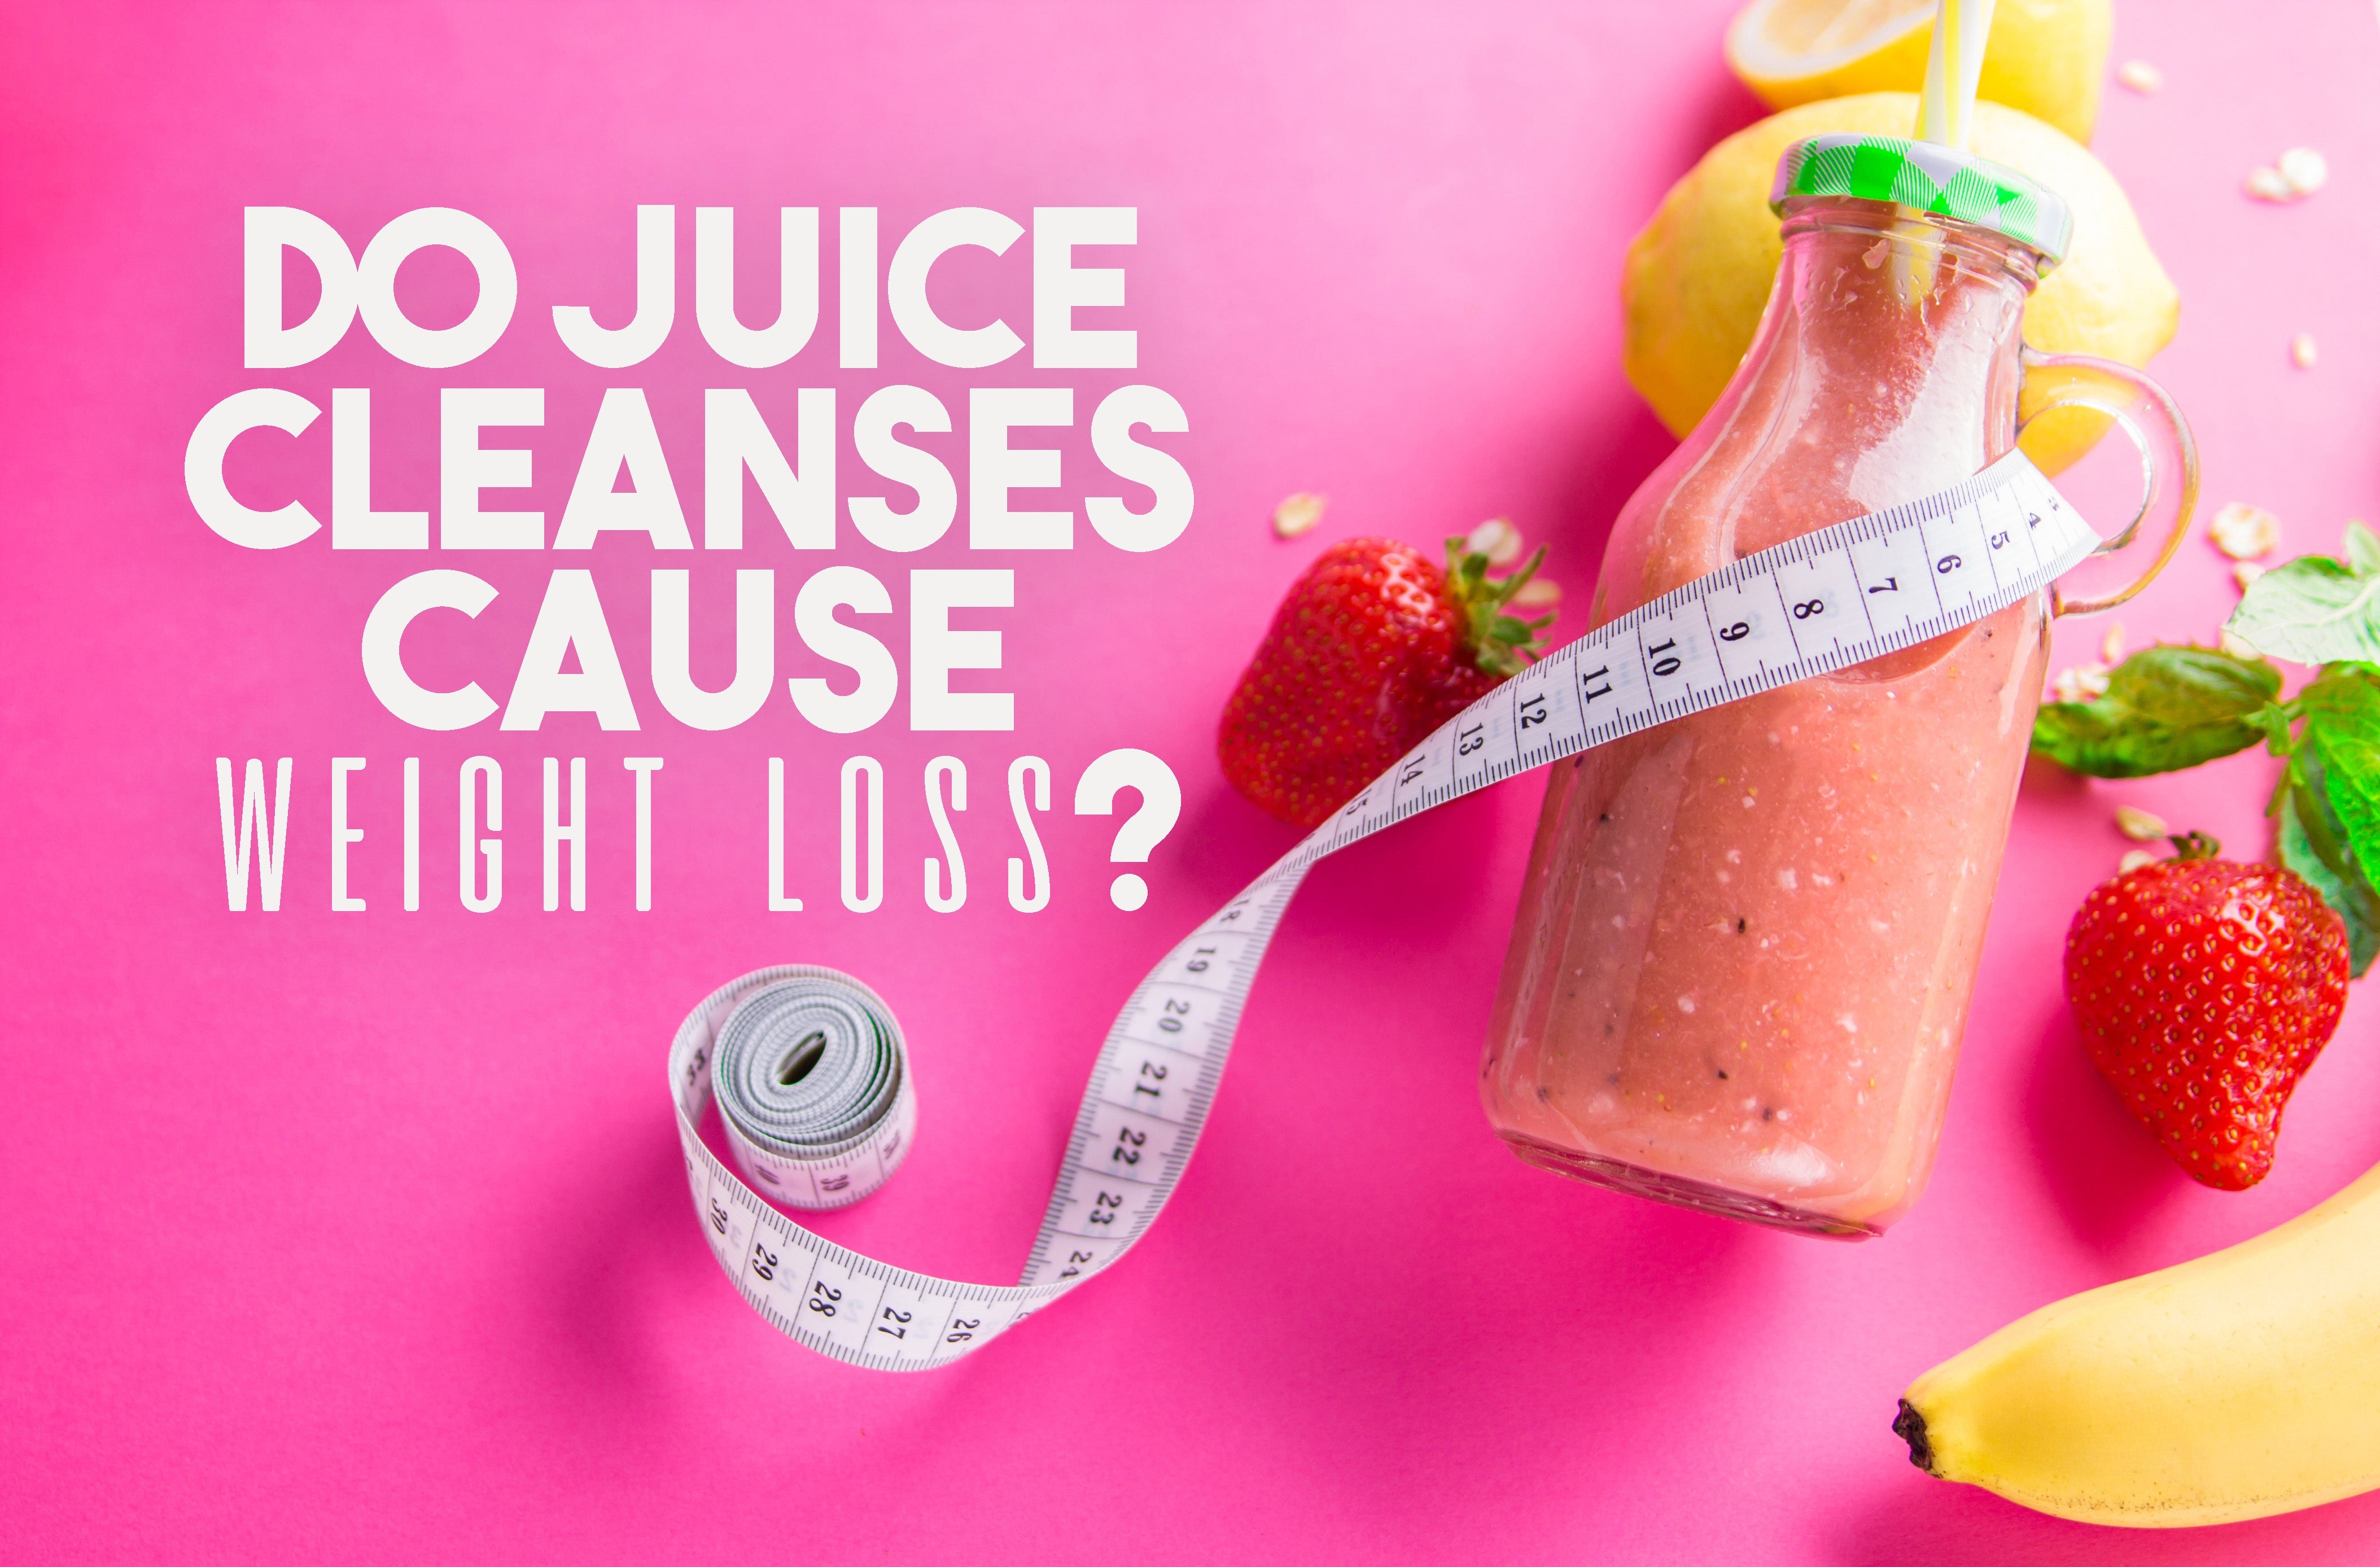 Do Juice Cleanses Cause Weight Loss?